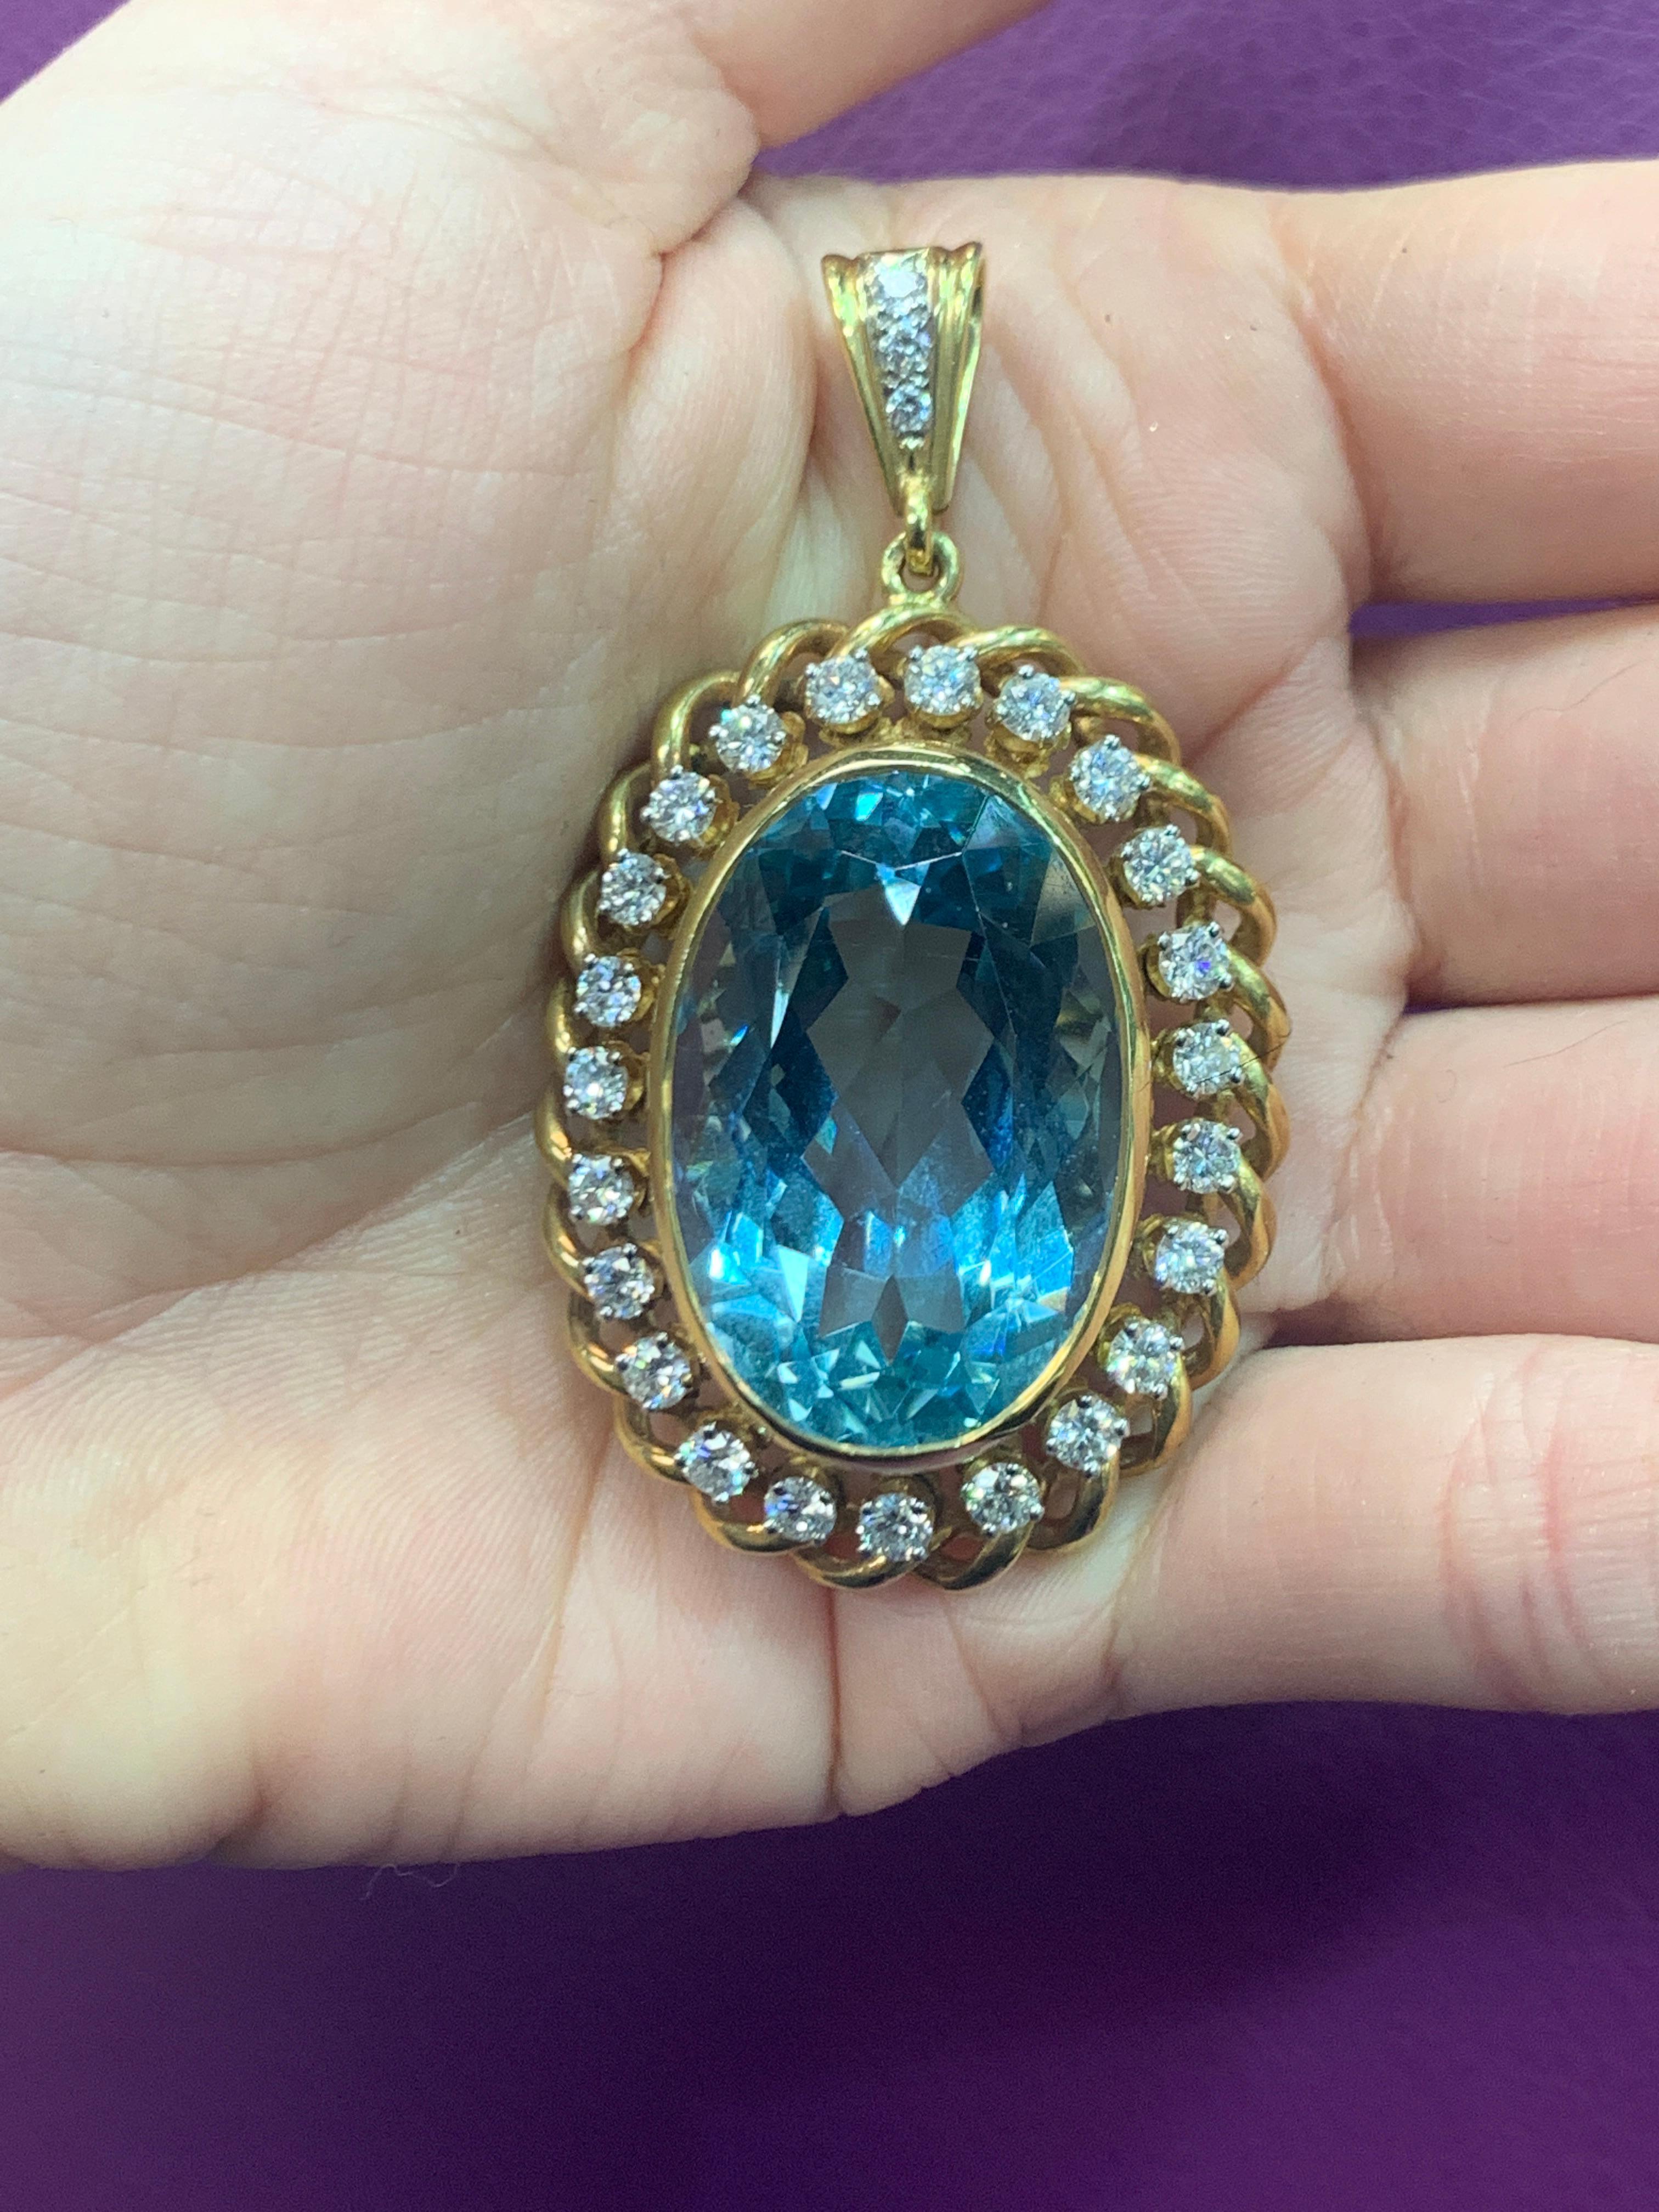 Huge Aquamarine & Diamond Pendant , 1 oval cut aquamarine surrounded by 26 round cut diamonds .
Aquamarine Weight: approximately 38.00 Cts  
Diamond Weight: approximately 1.80 Cts  
Measurements: 2.25